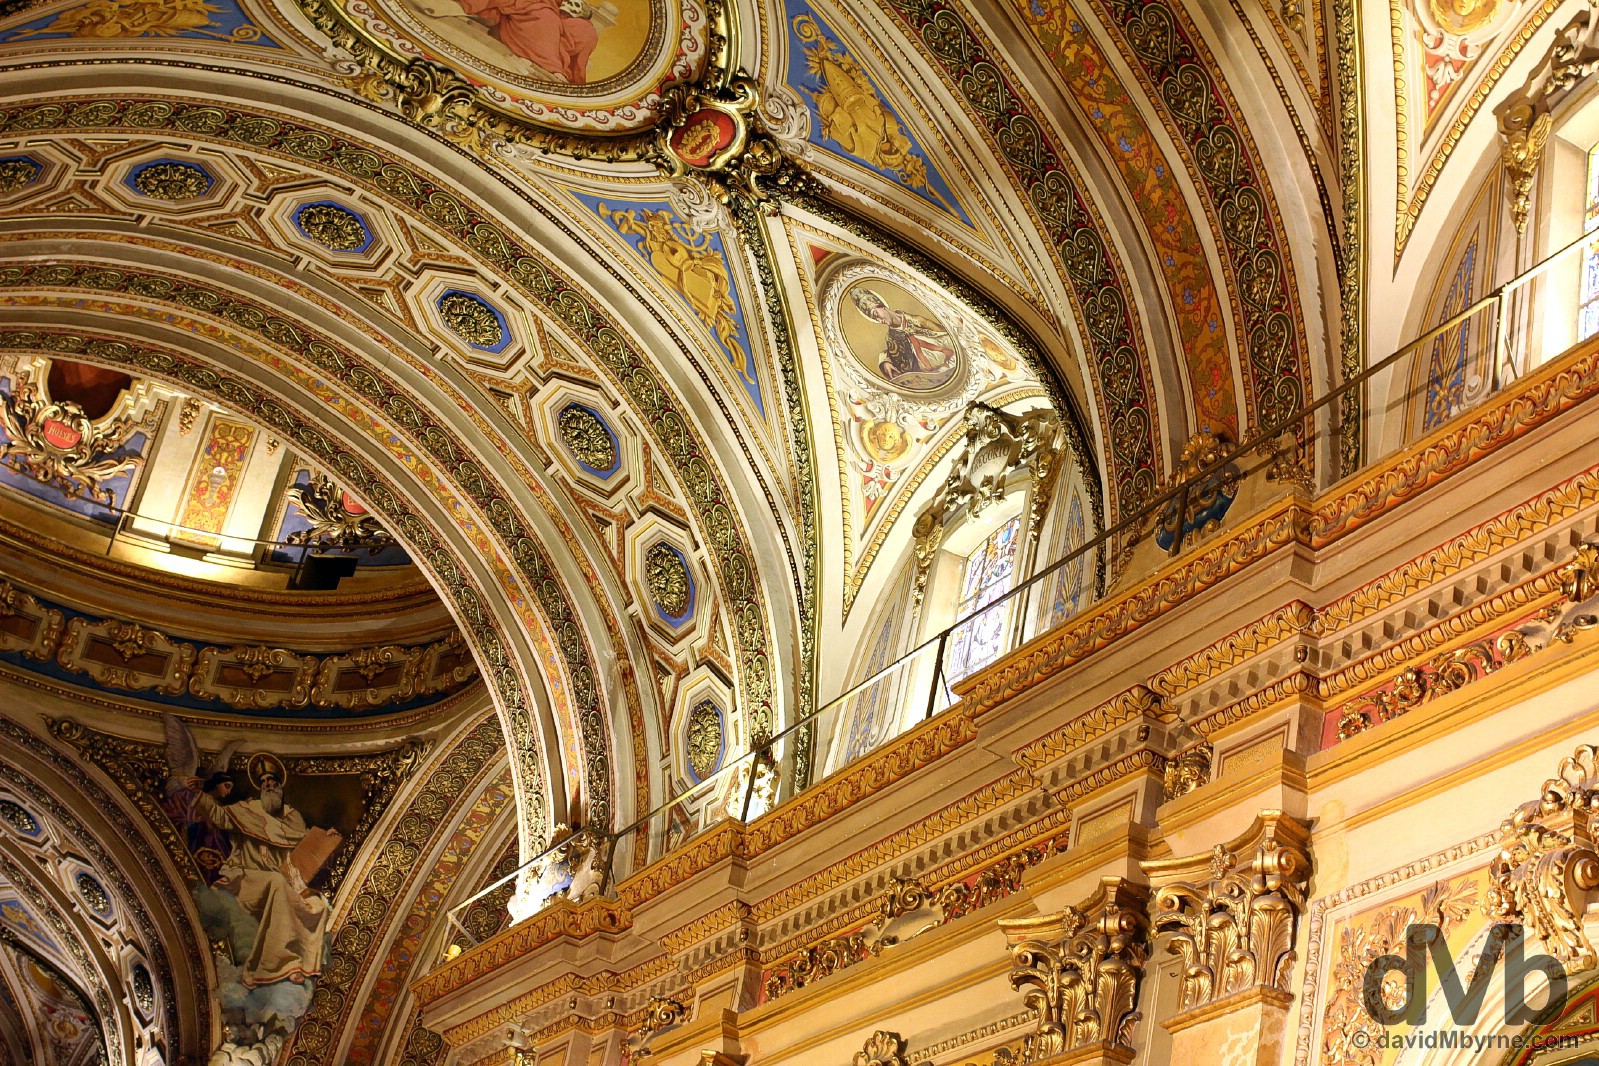 A portion of walls and ceiling of the Cathedral in Cordoba, Argentina. September 23, 2015. 